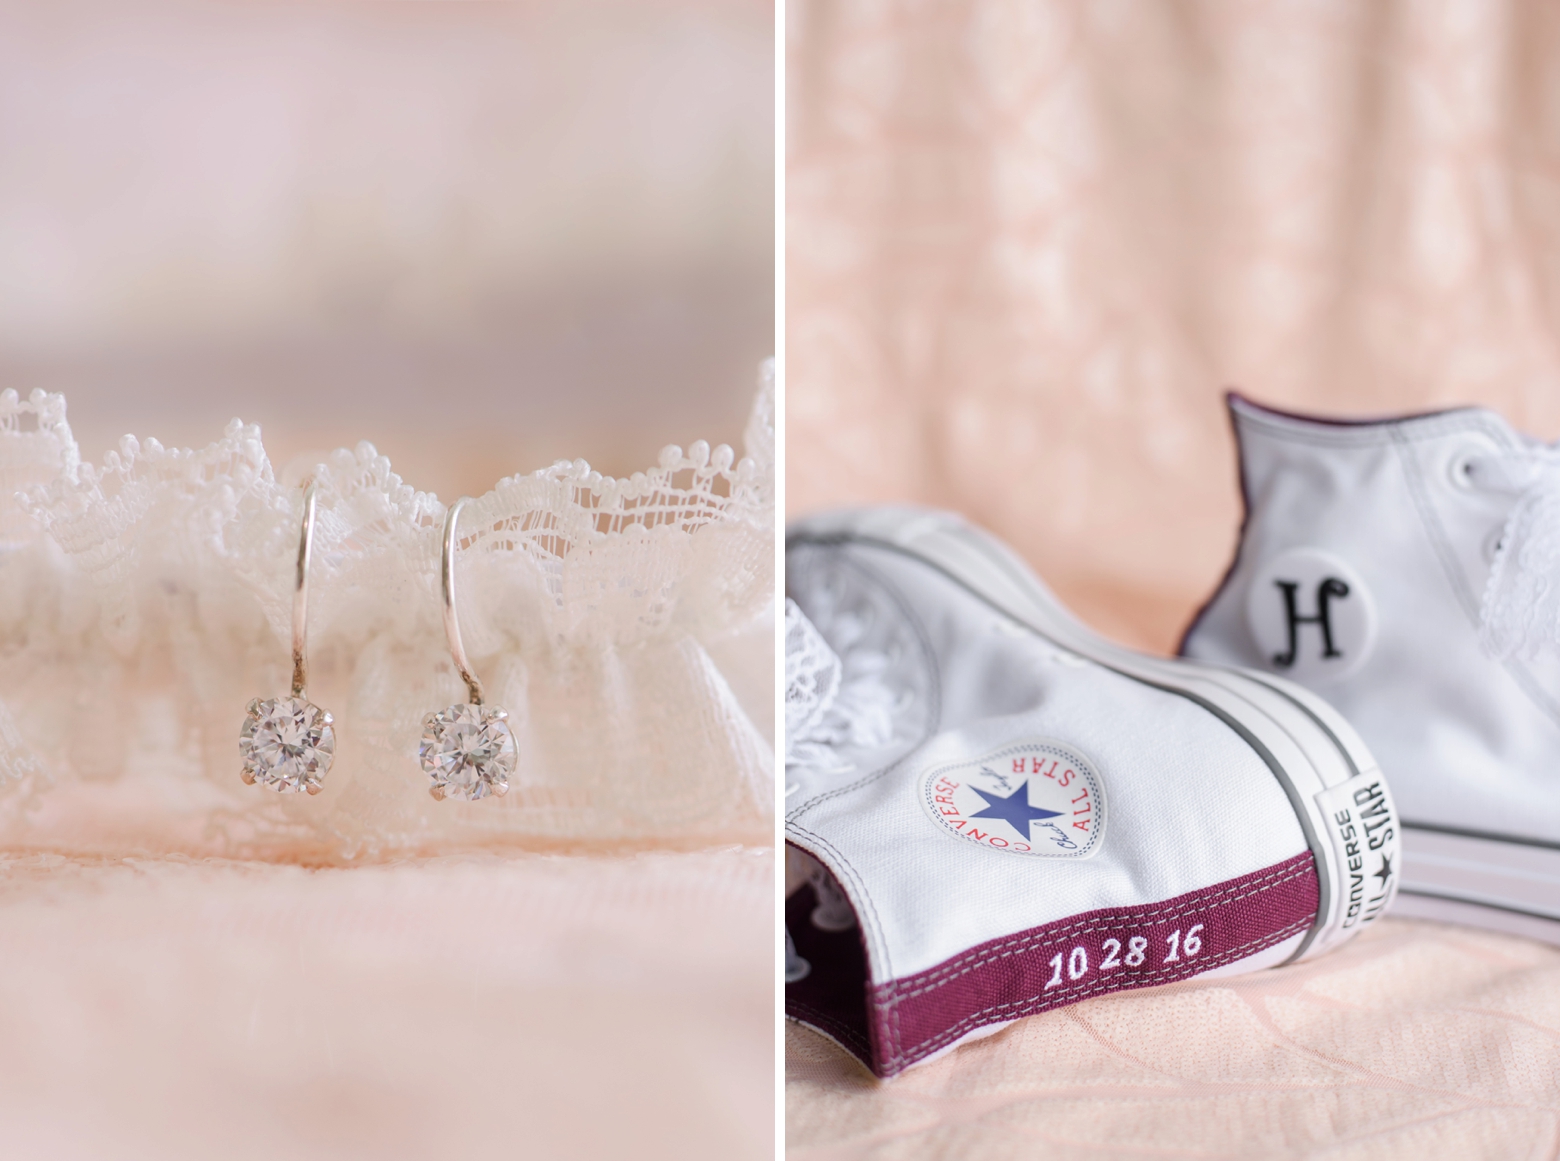 The brides earrings and custom converse sneakers